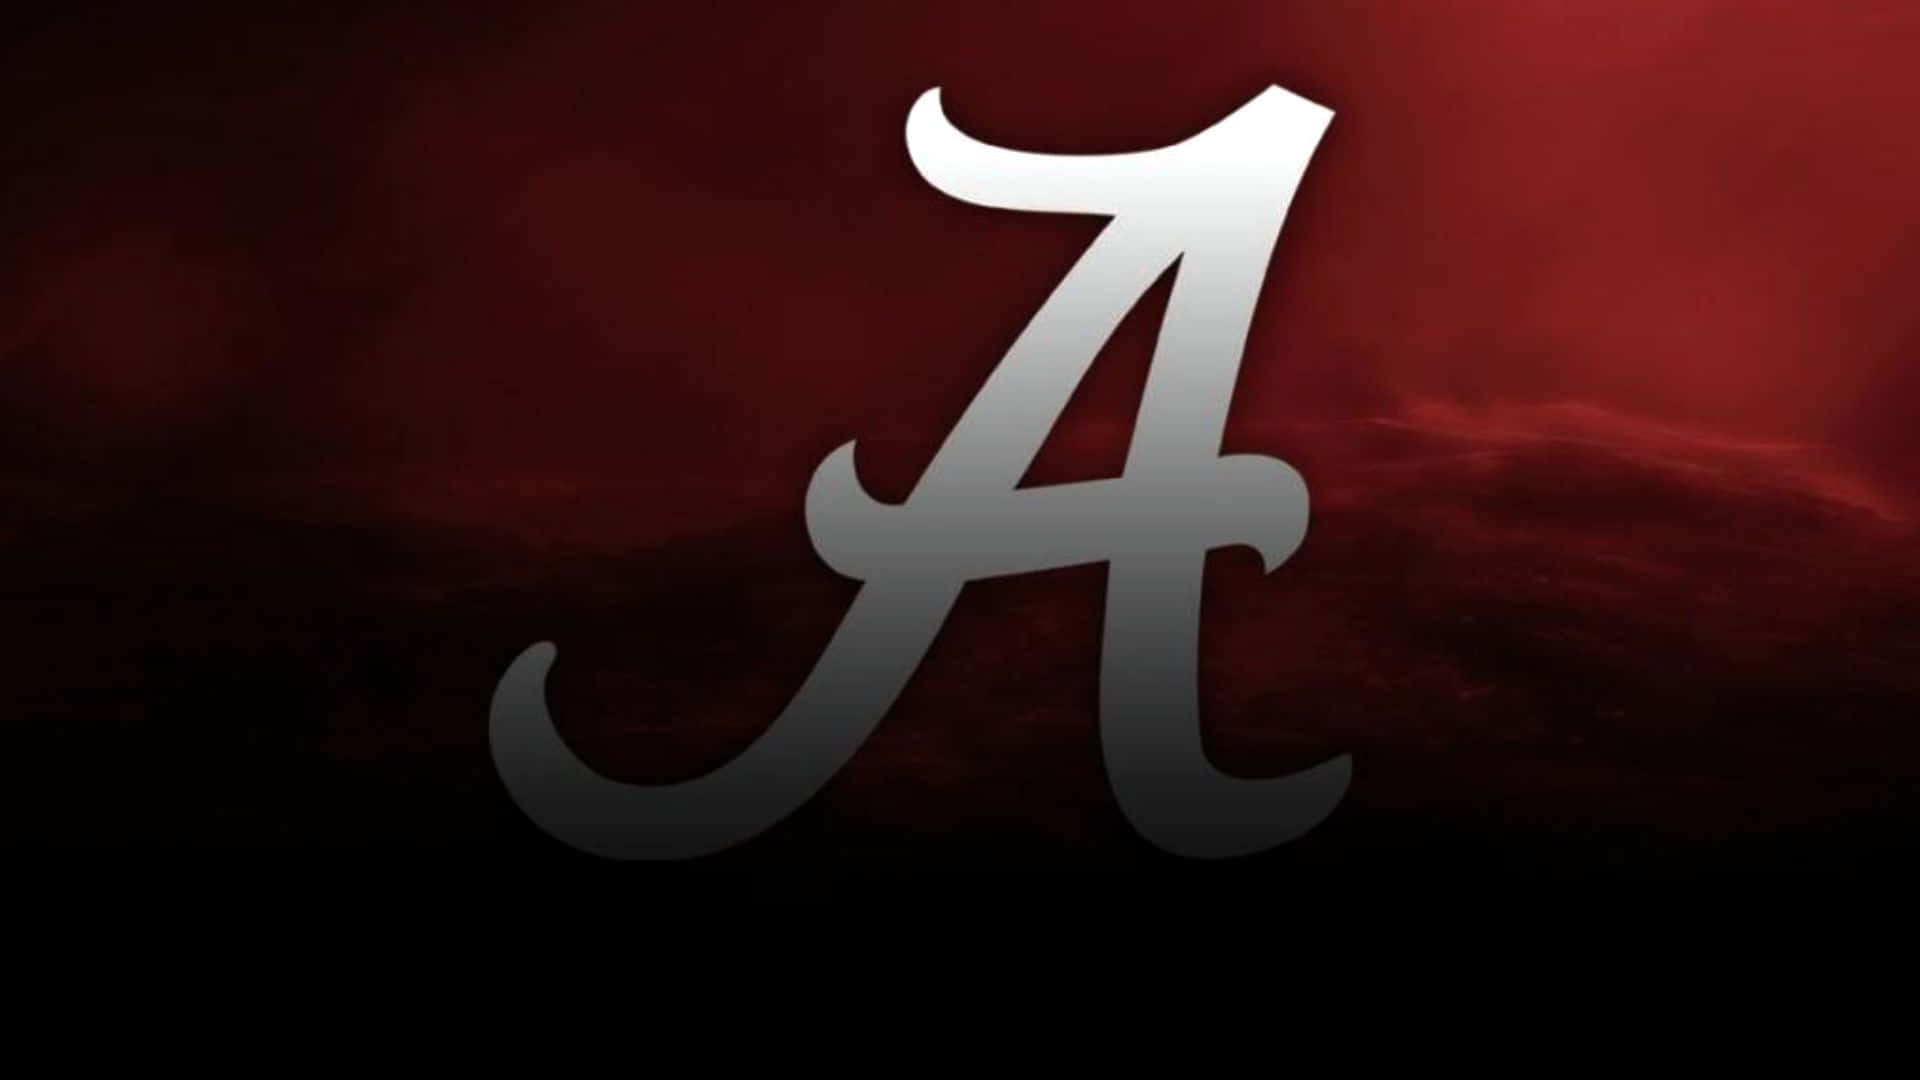 Roll Tide Roll - Show your support for Alabama Crimson Tide